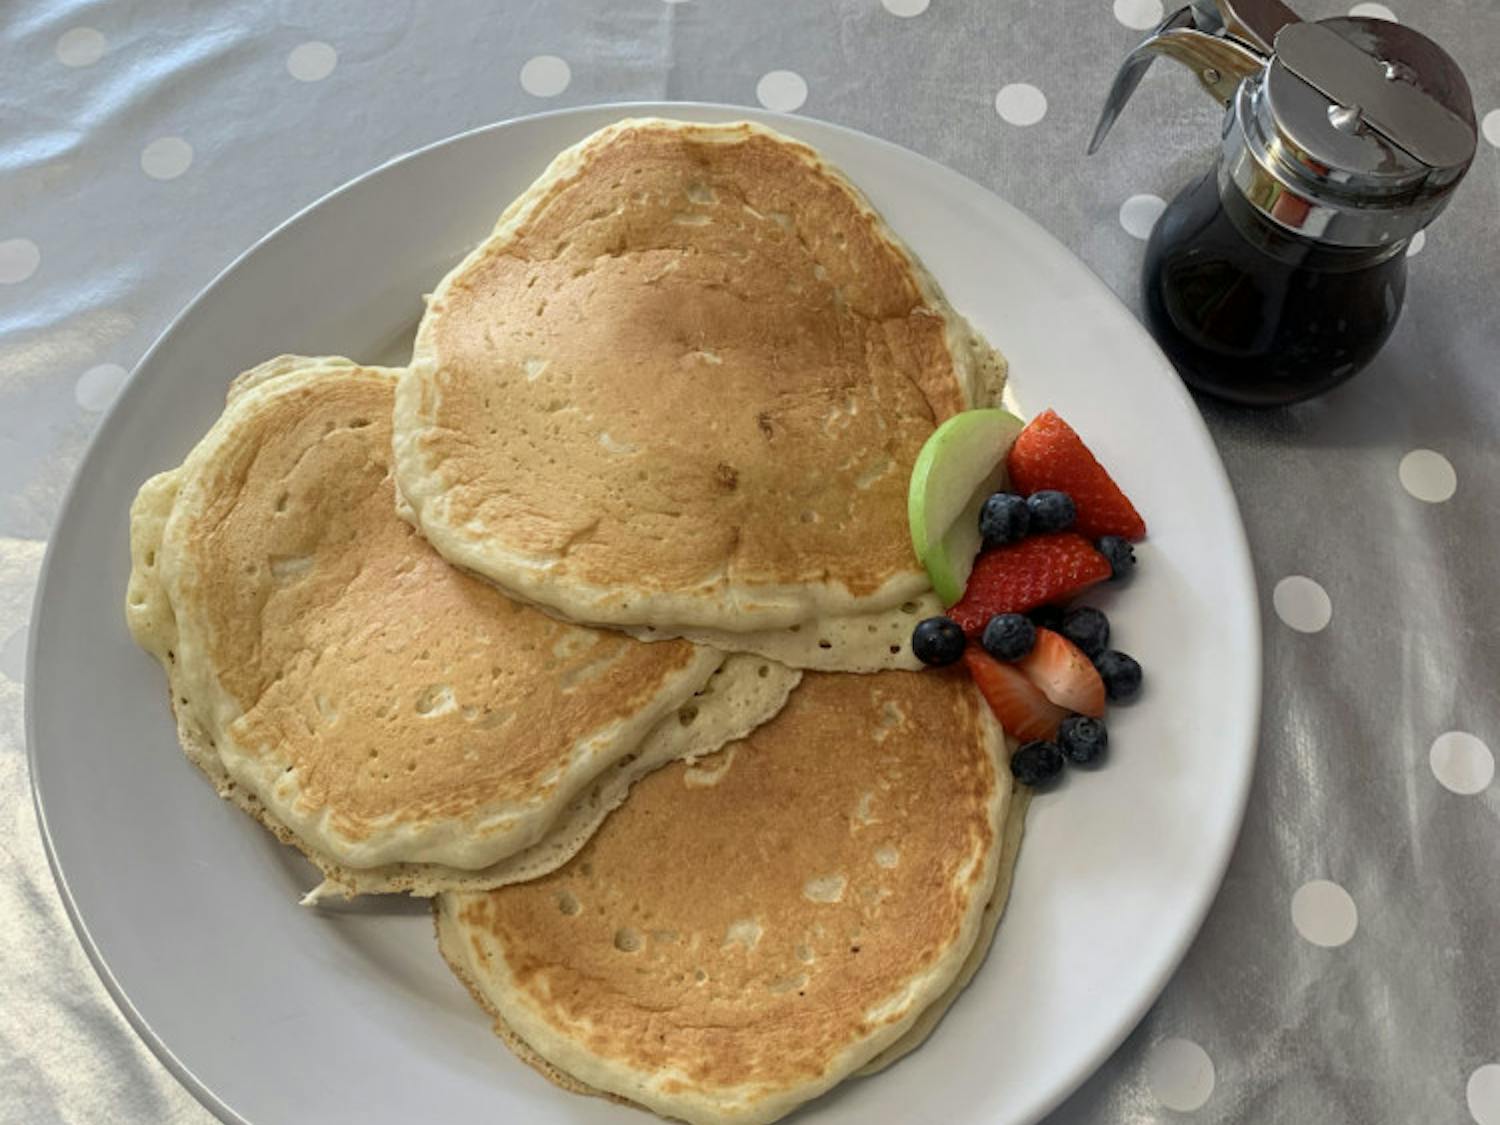 Hidden gem Daybreak Pleasant Street provides melt-in-your mouth pancakes with a side of fruit.